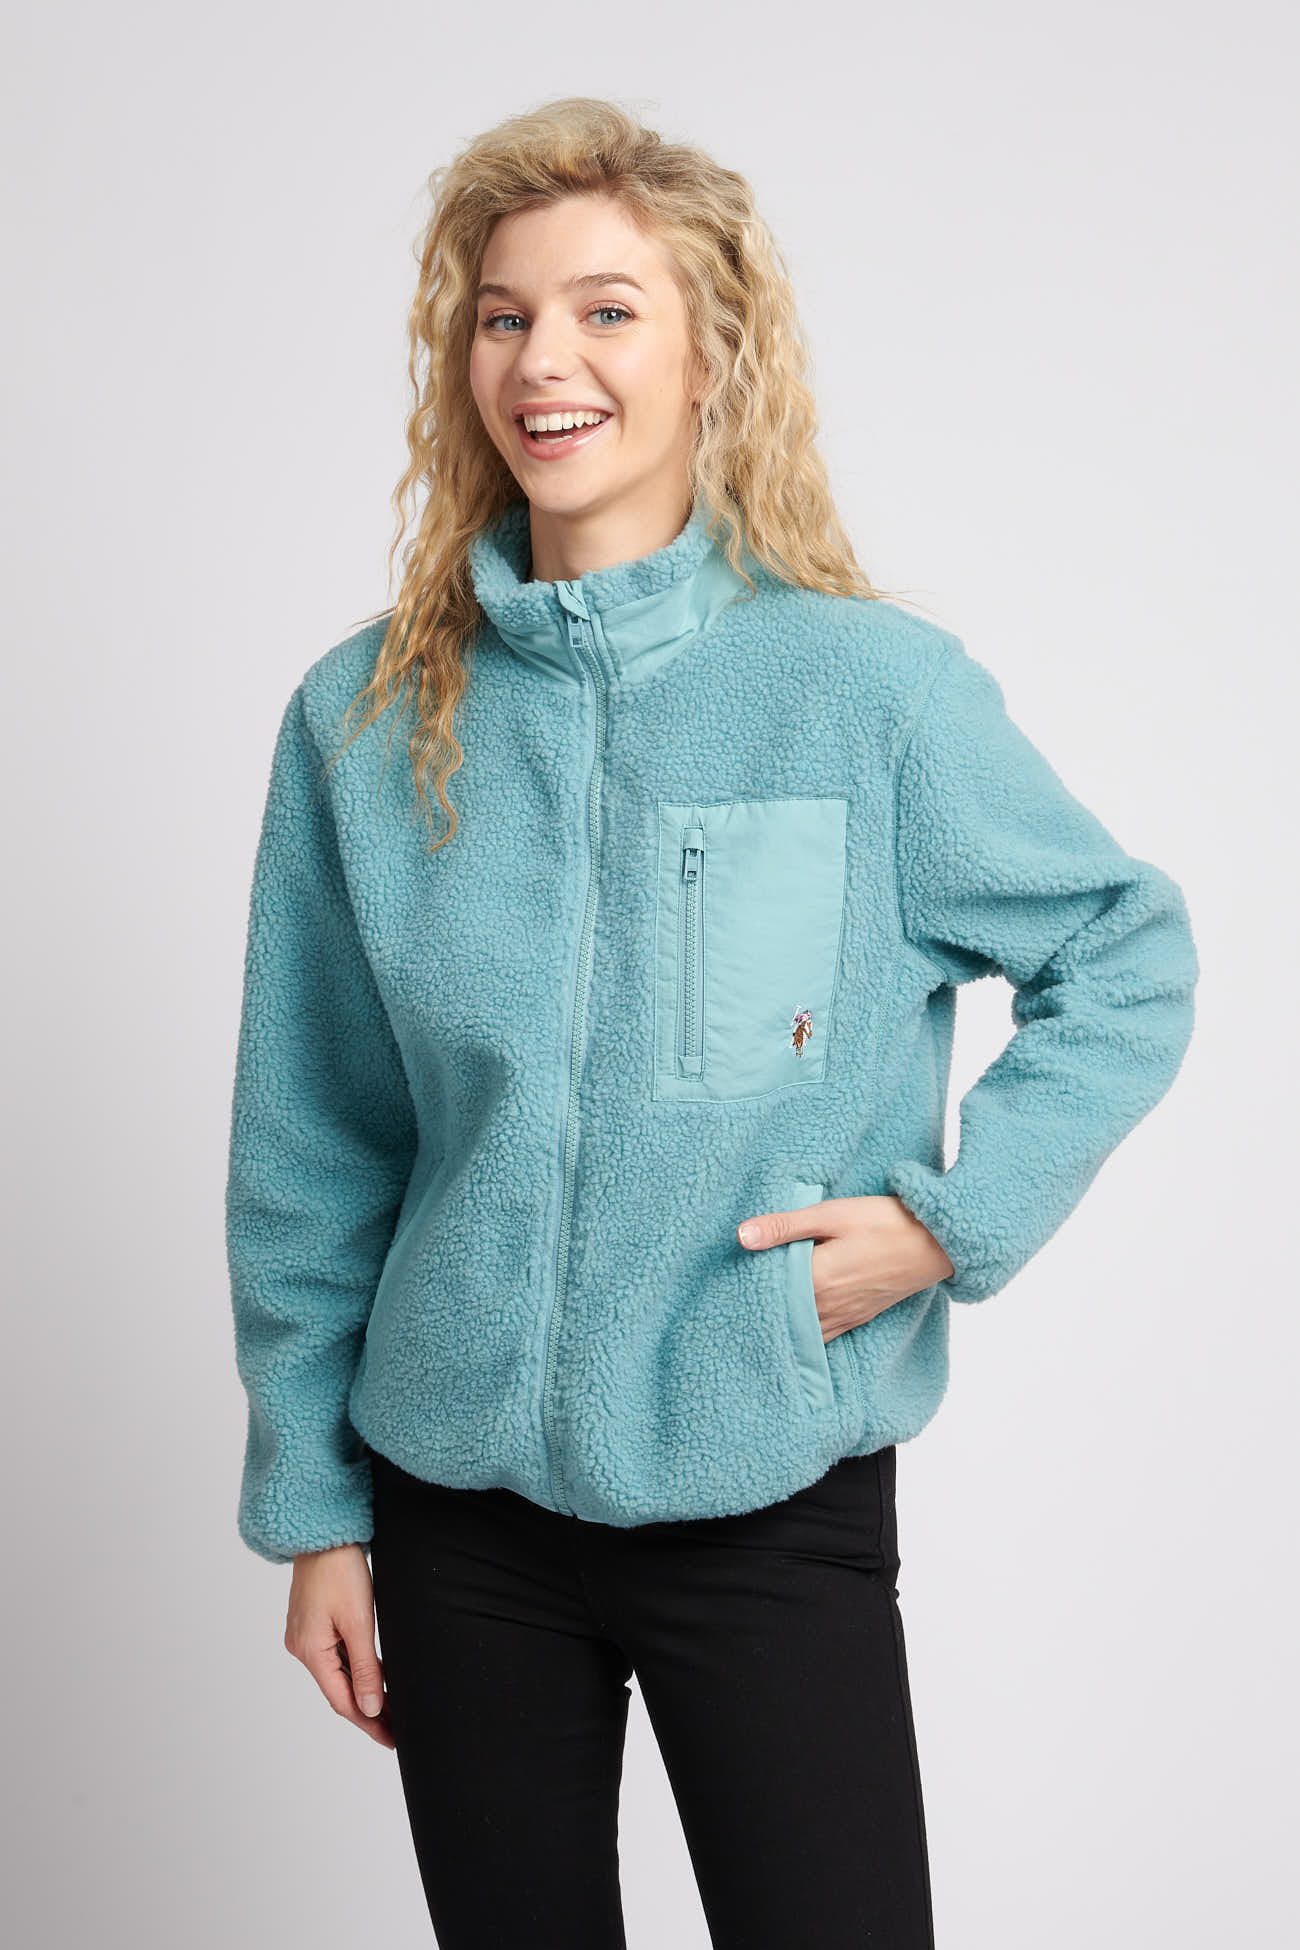 Womens Zip-Up Teddy Jacket in Cameo Blue